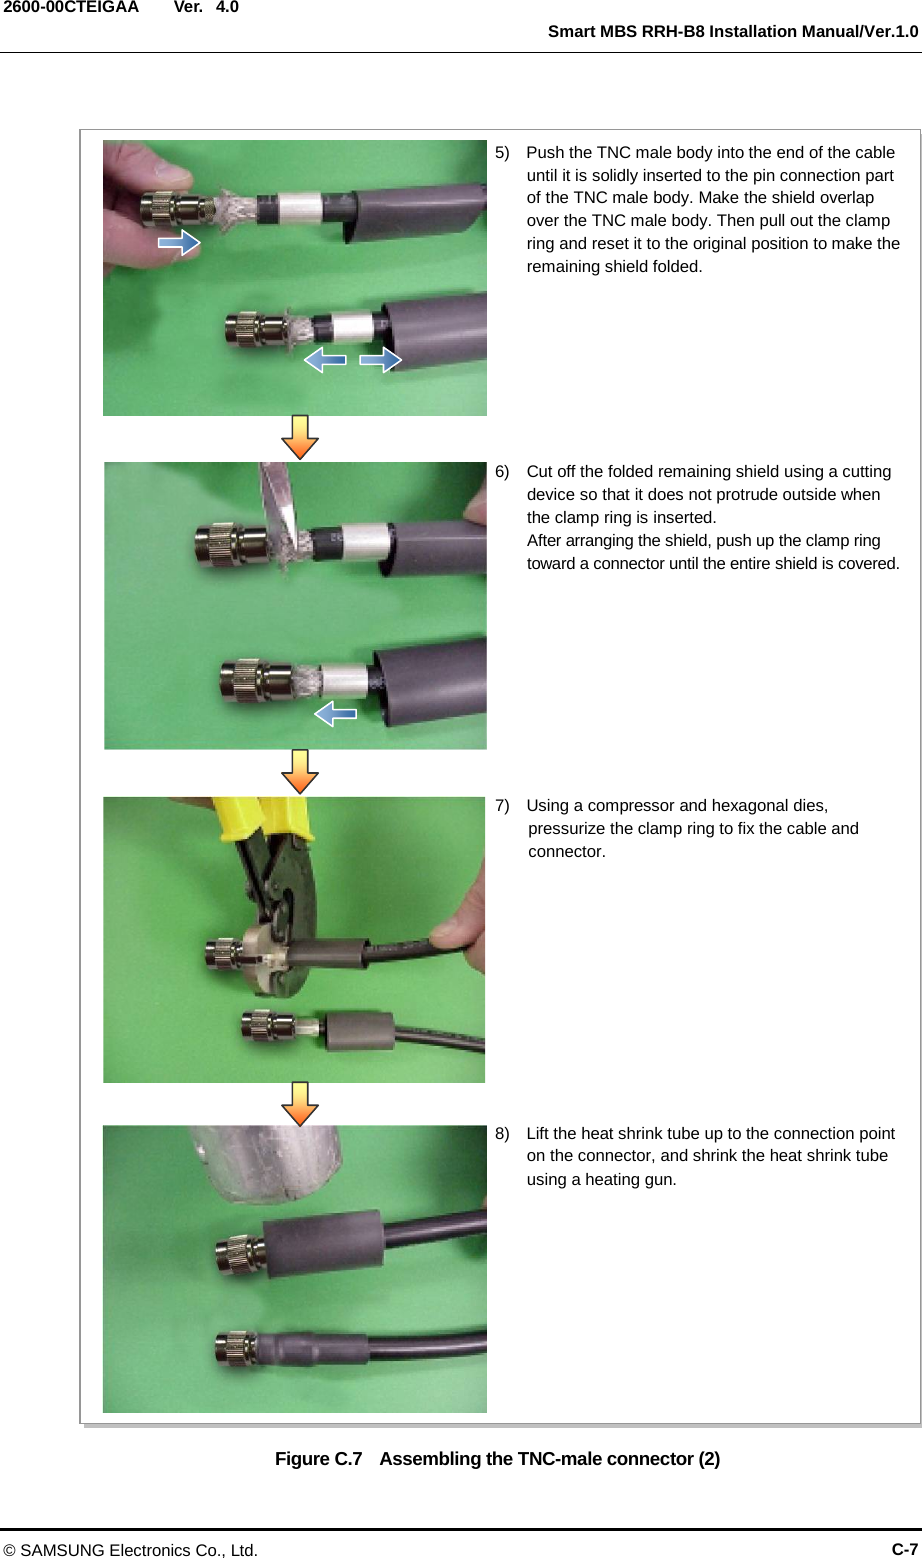  Ver.   Smart MBS RRH-B8 Installation Manual/Ver.1.0 2600-00CTEIGAA 4.0  Figure C.7   Assembling the TNC-male connector (2) 5)  Push the TNC male body into the end of the cable until it is solidly inserted to the pin connection part of the TNC male body. Make the shield overlap over the TNC male body. Then pull out the clamp ring and reset it to the original position to make the remaining shield folded. 6)  Cut off the folded remaining shield using a cutting device so that it does not protrude outside when the clamp ring is inserted.   After arranging the shield, push up the clamp ring toward a connector until the entire shield is covered. 7)  Using a compressor and hexagonal dies, pressurize the clamp ring to fix the cable and connector. 8)  Lift the heat shrink tube up to the connection point on the connector, and shrink the heat shrink tube using a heating gun. © SAMSUNG Electronics Co., Ltd. C-7 